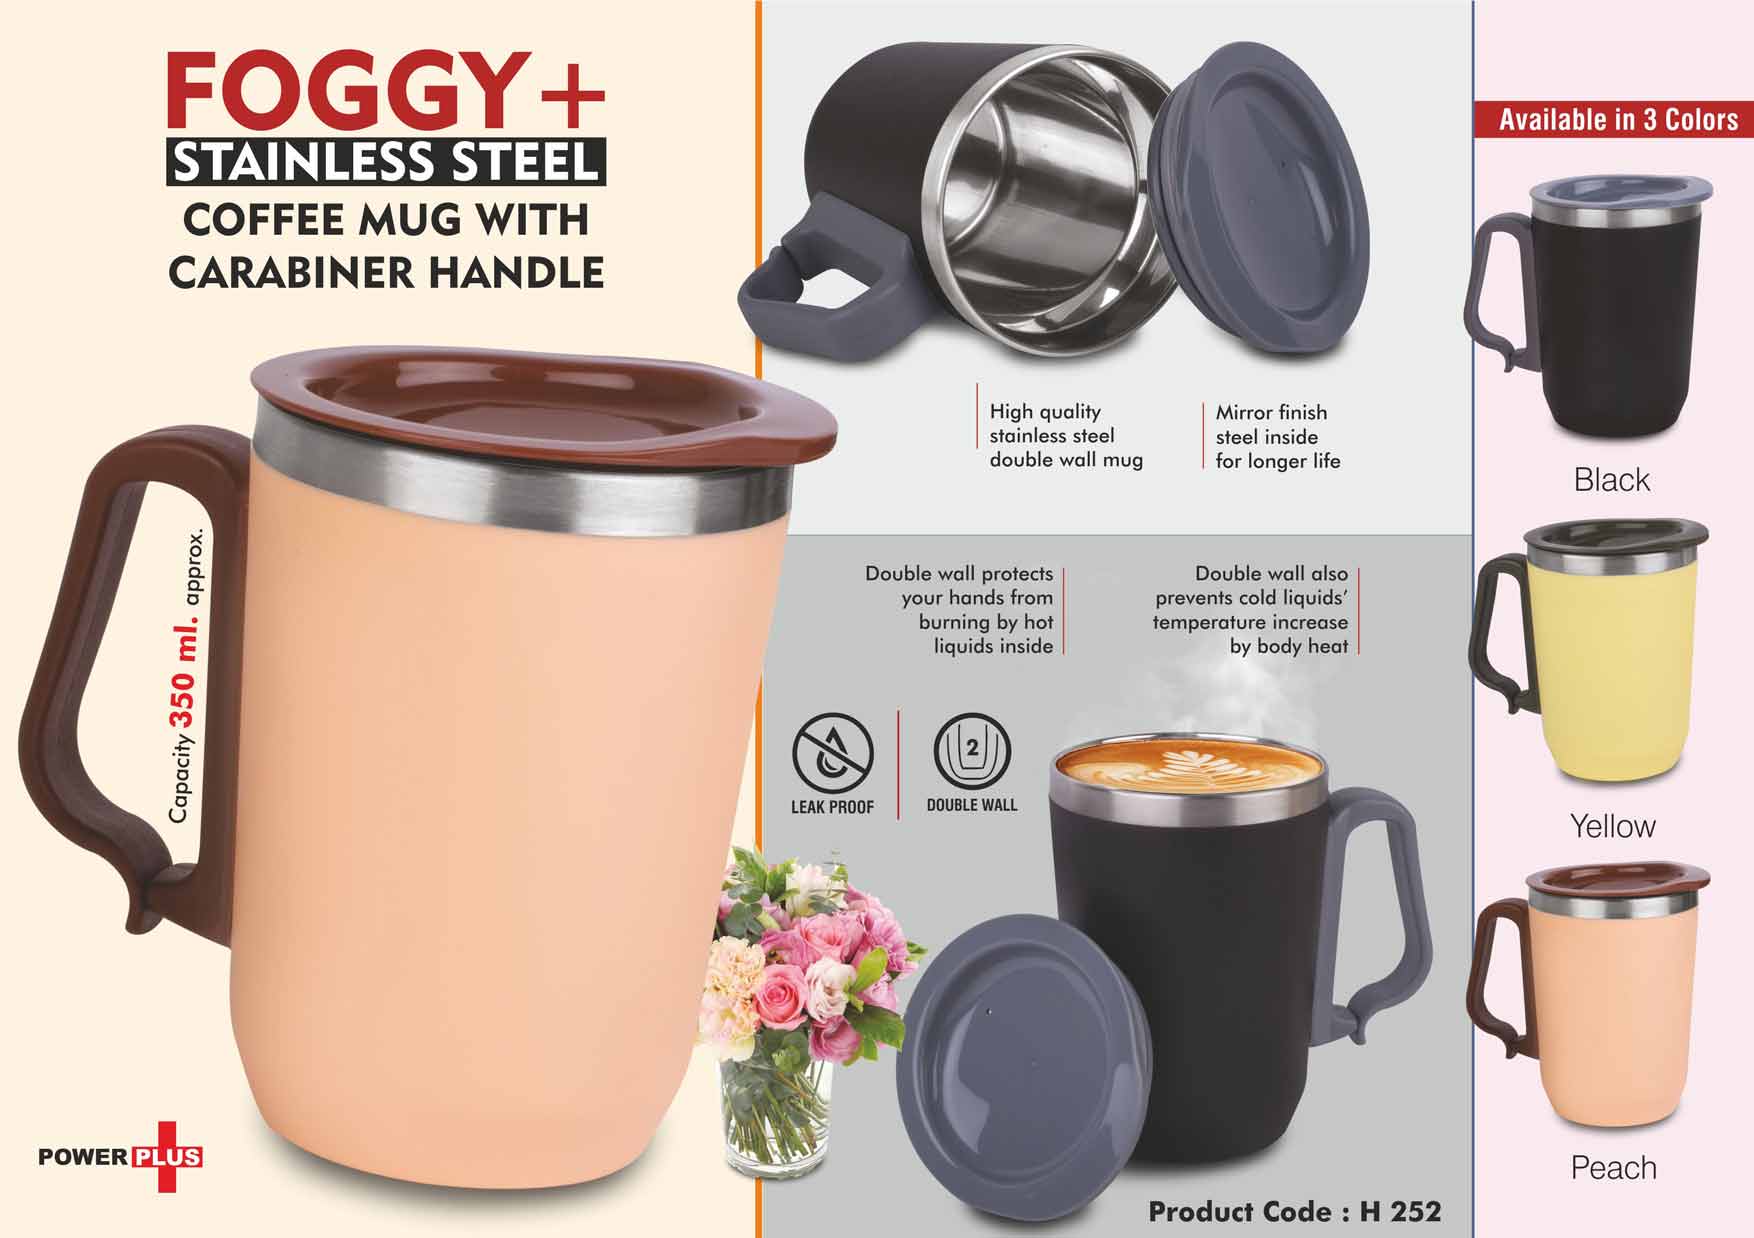 Foggy+ Stainless Steel Coffee Mug with Carabiner Handle and Leakproof Cap - 350ml Capacity in Black, Yellow, and Peach